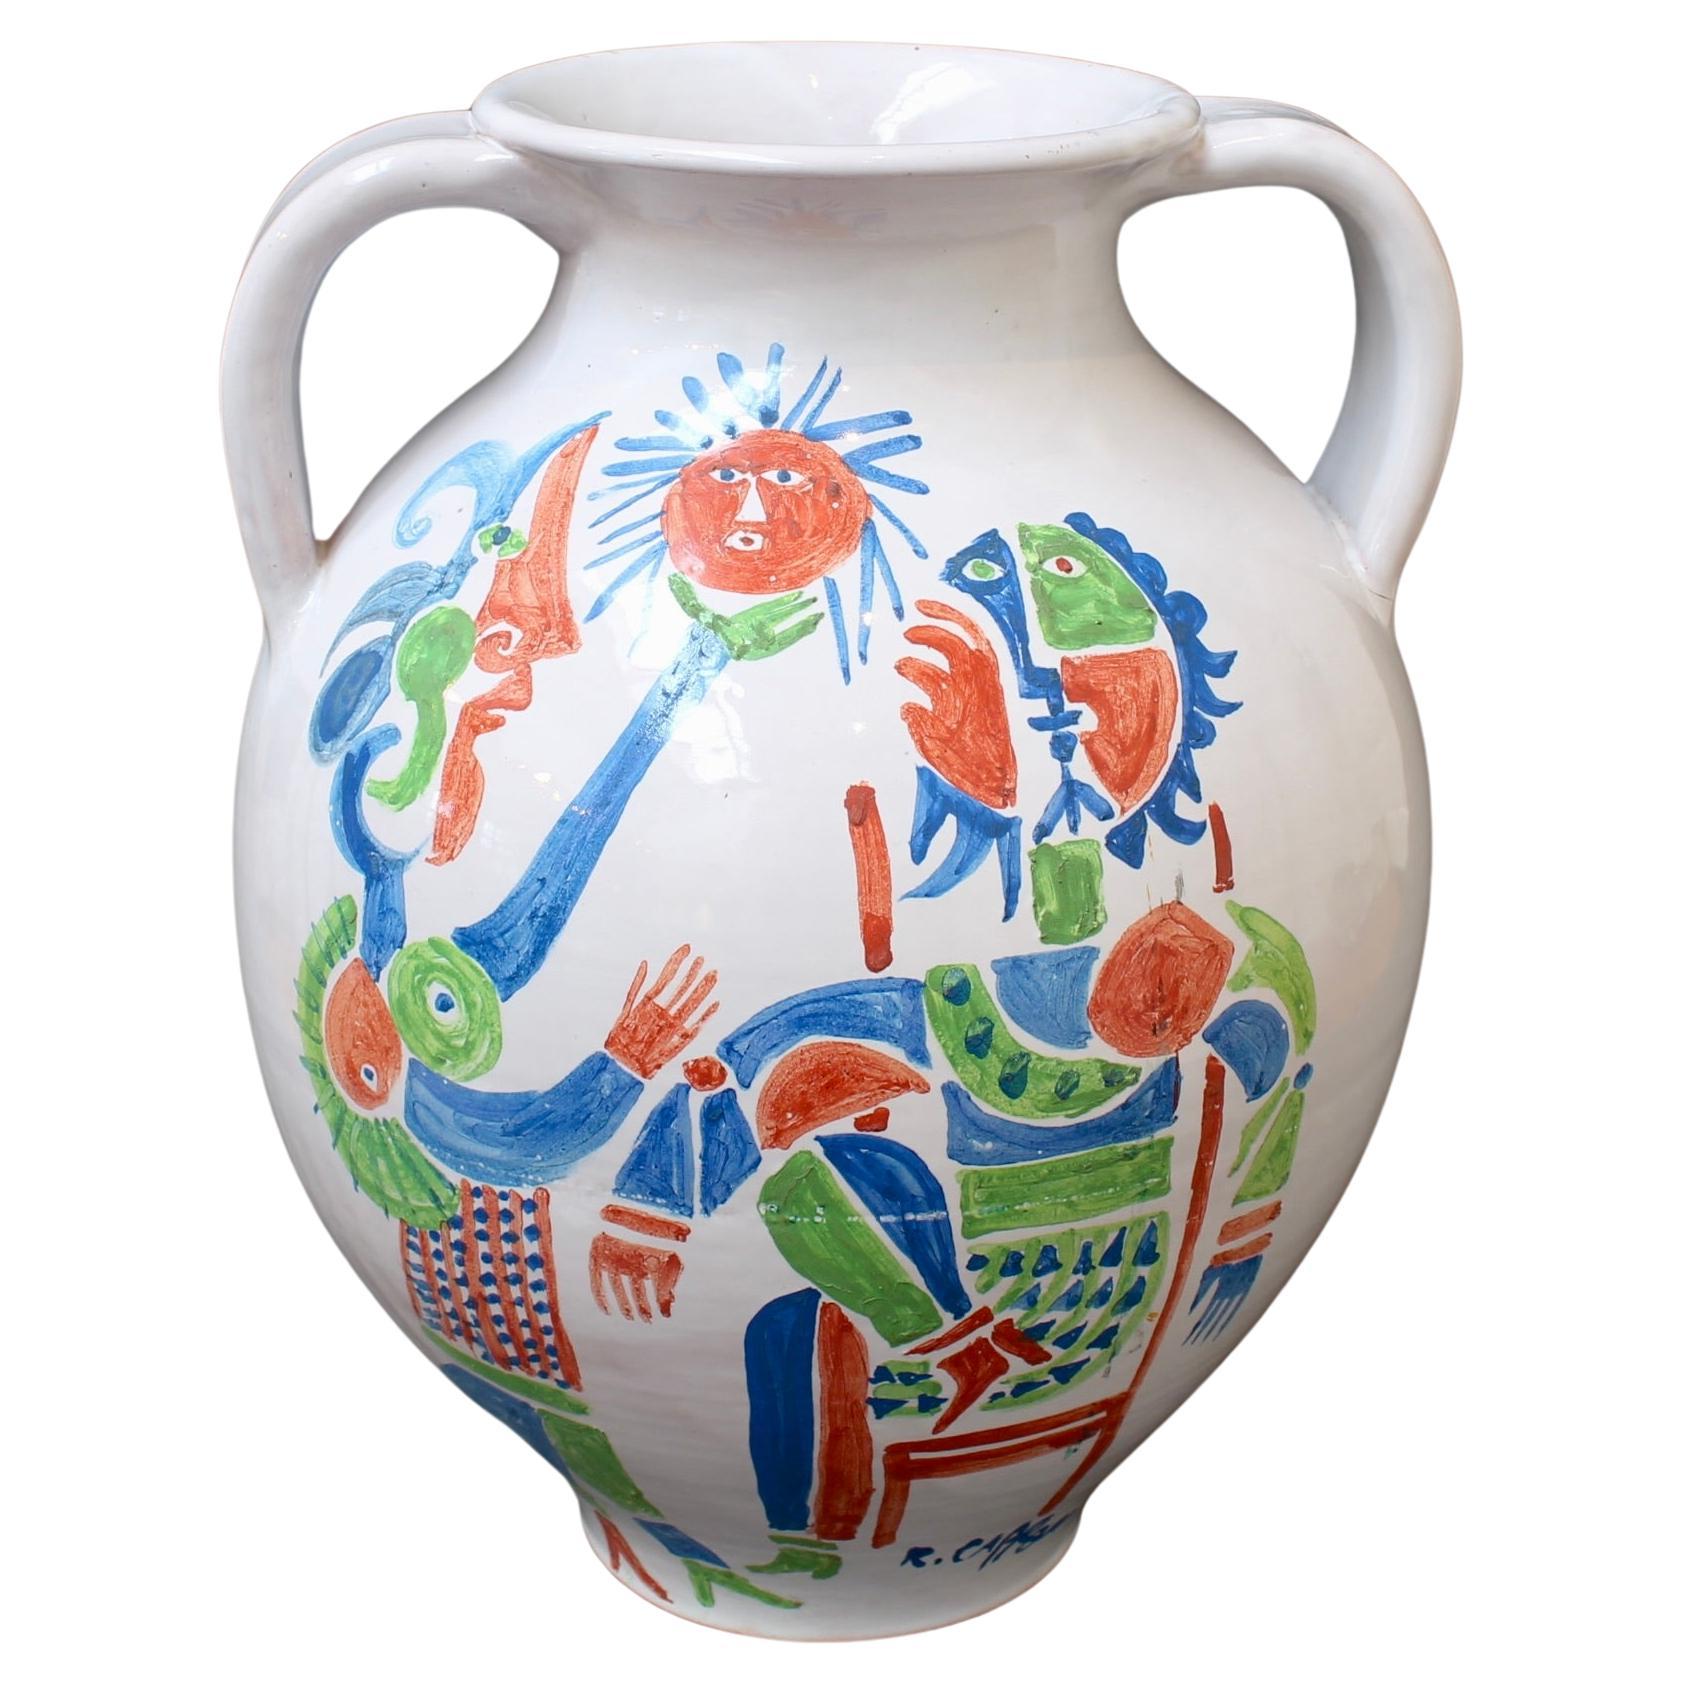 Vintage French Hand-Painted Ceramic Vase by Roger Capron (circa 1960s) For Sale